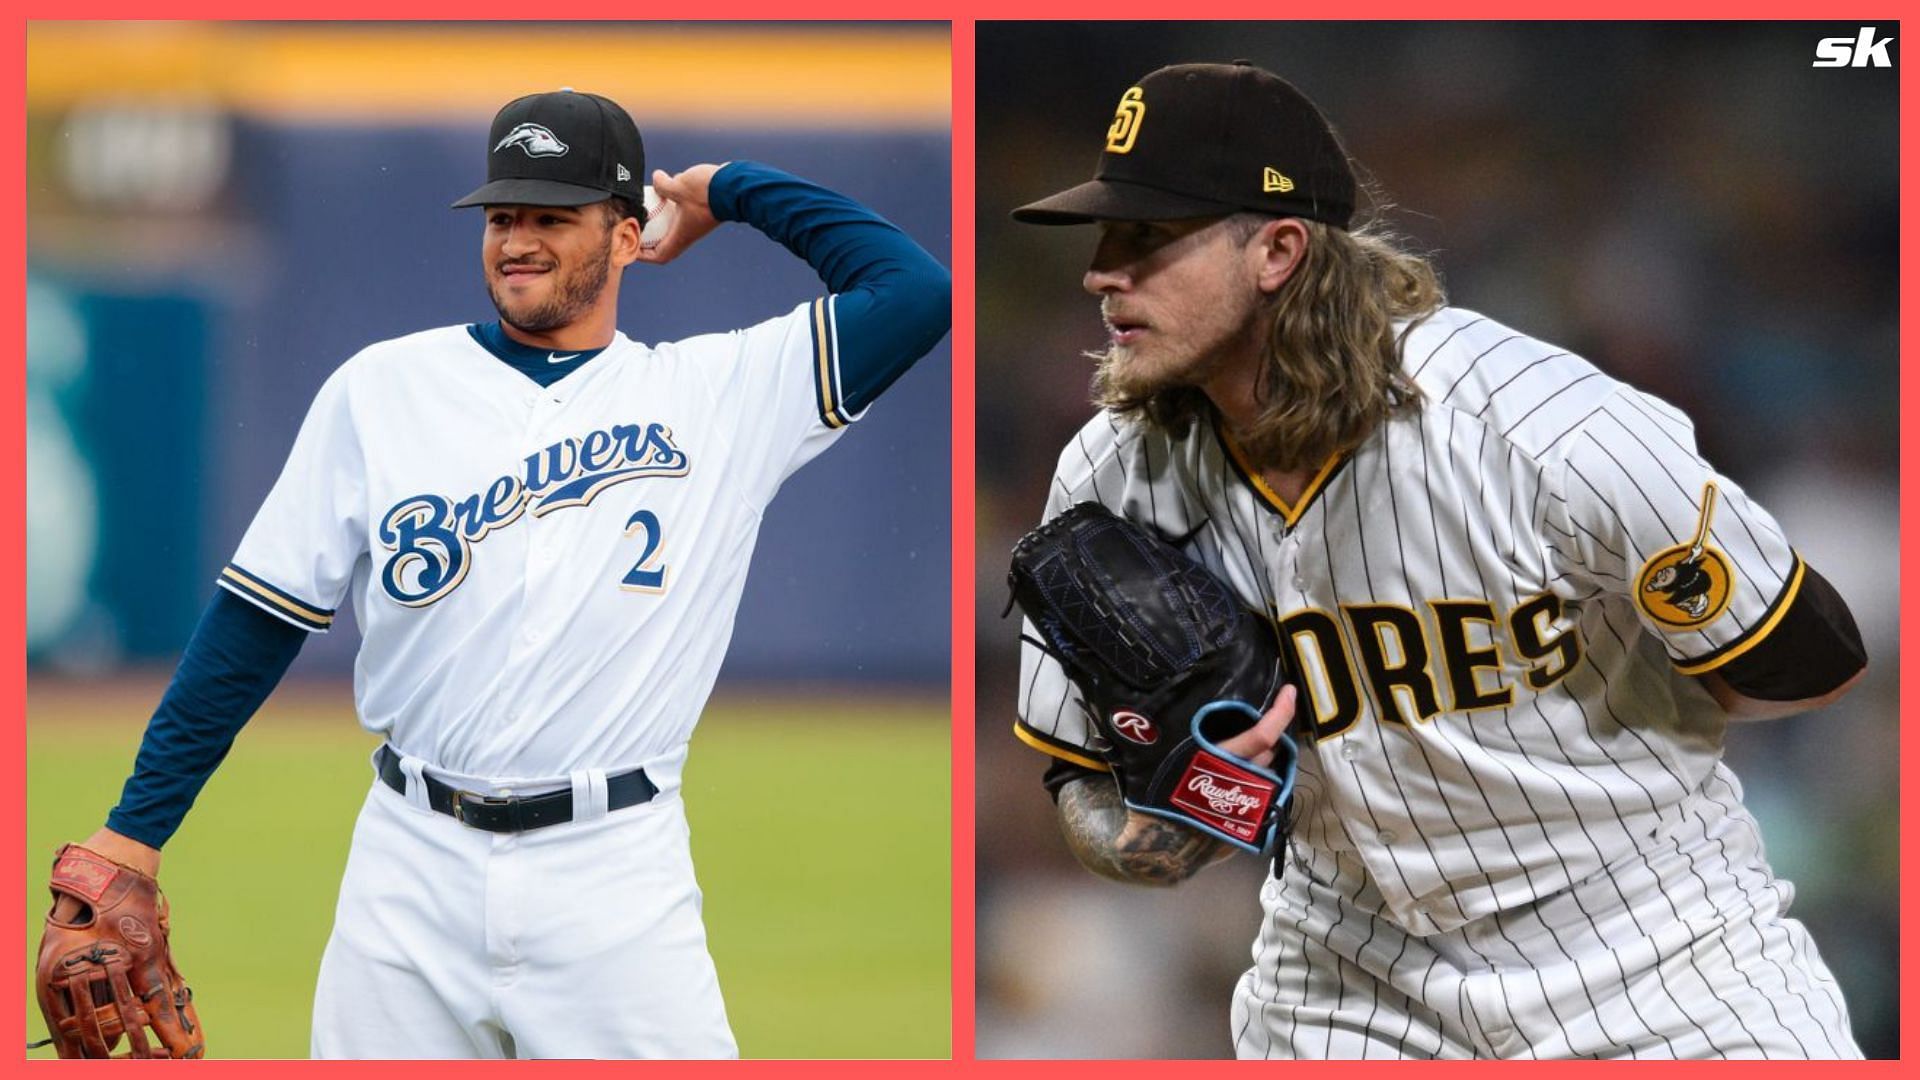 Which players have played for both Brewers and Padres in their careers?